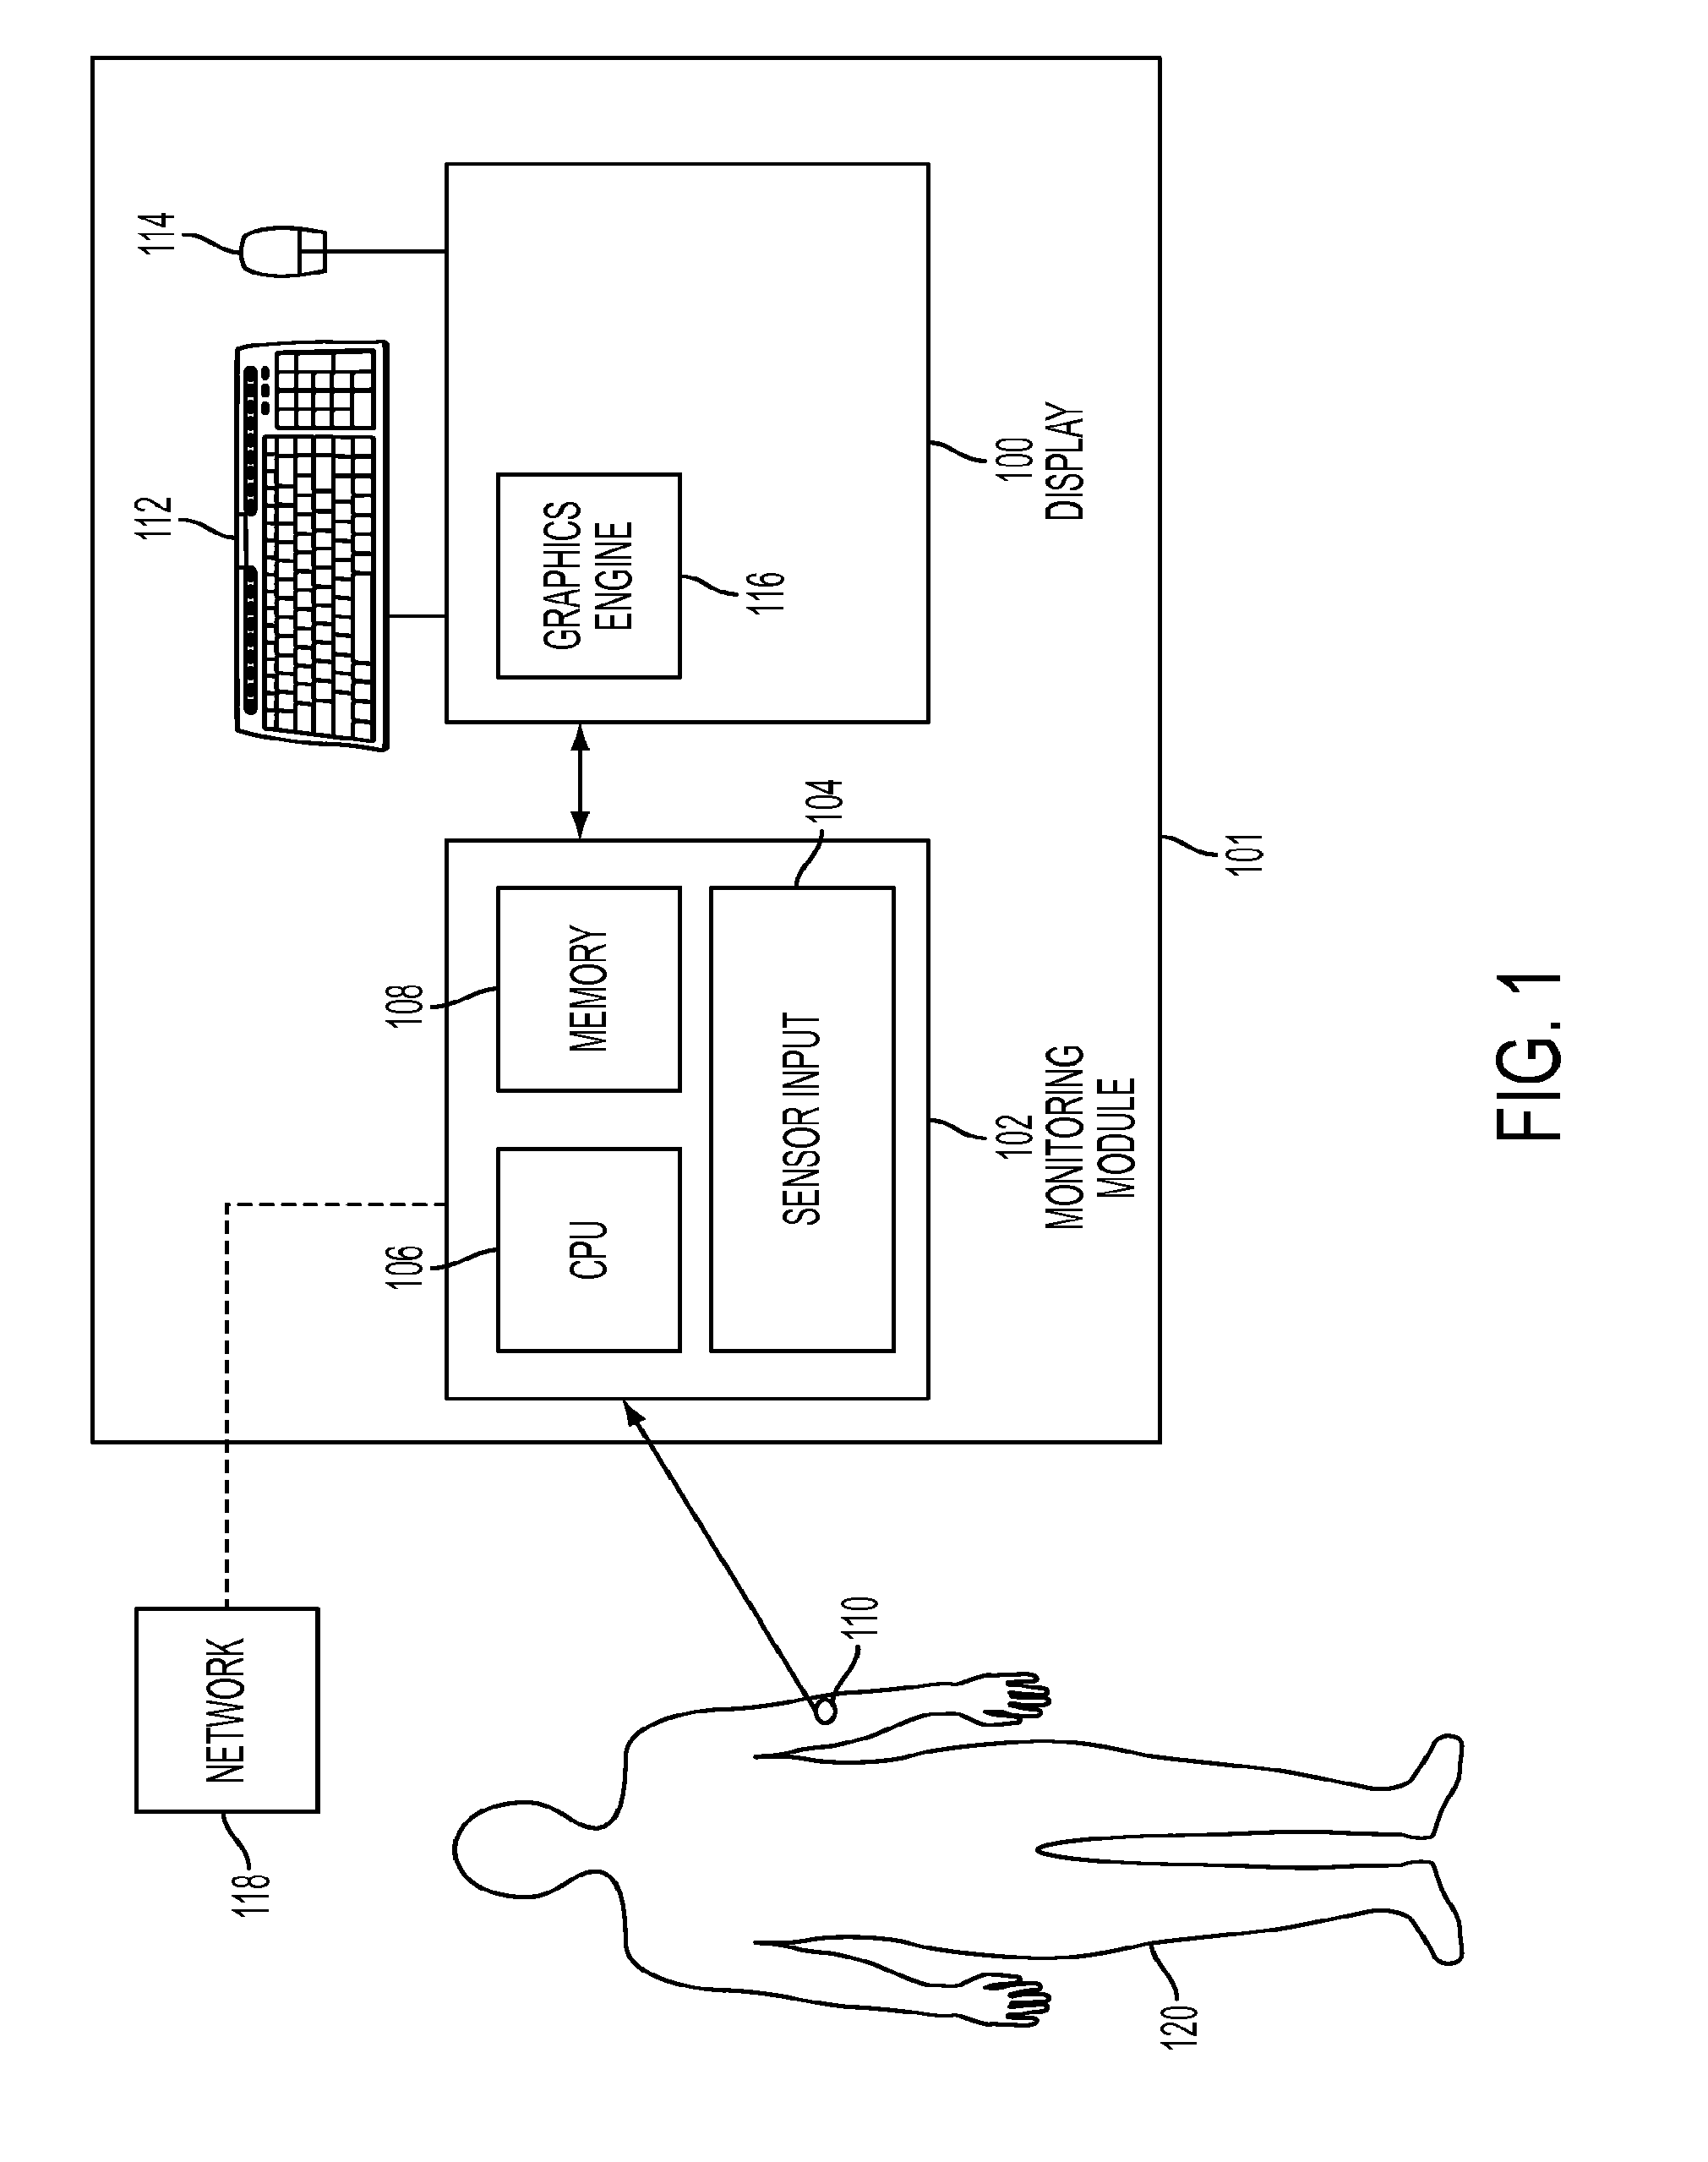 Systems and methods for monitoring and displaying a patient's status